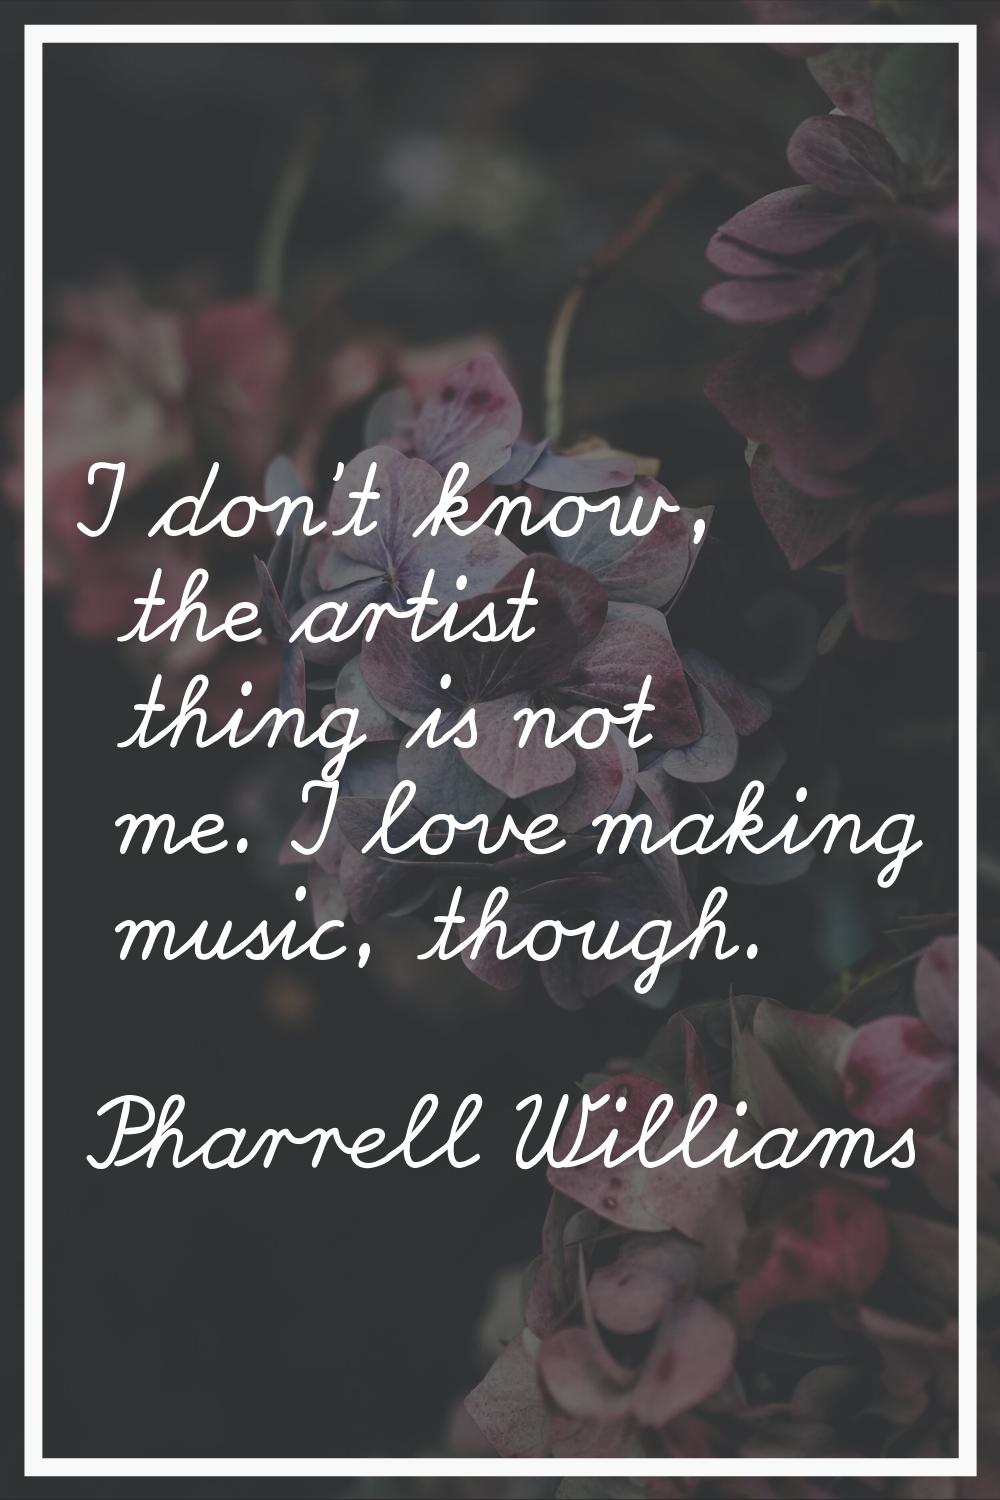 I don't know, the artist thing is not me. I love making music, though.